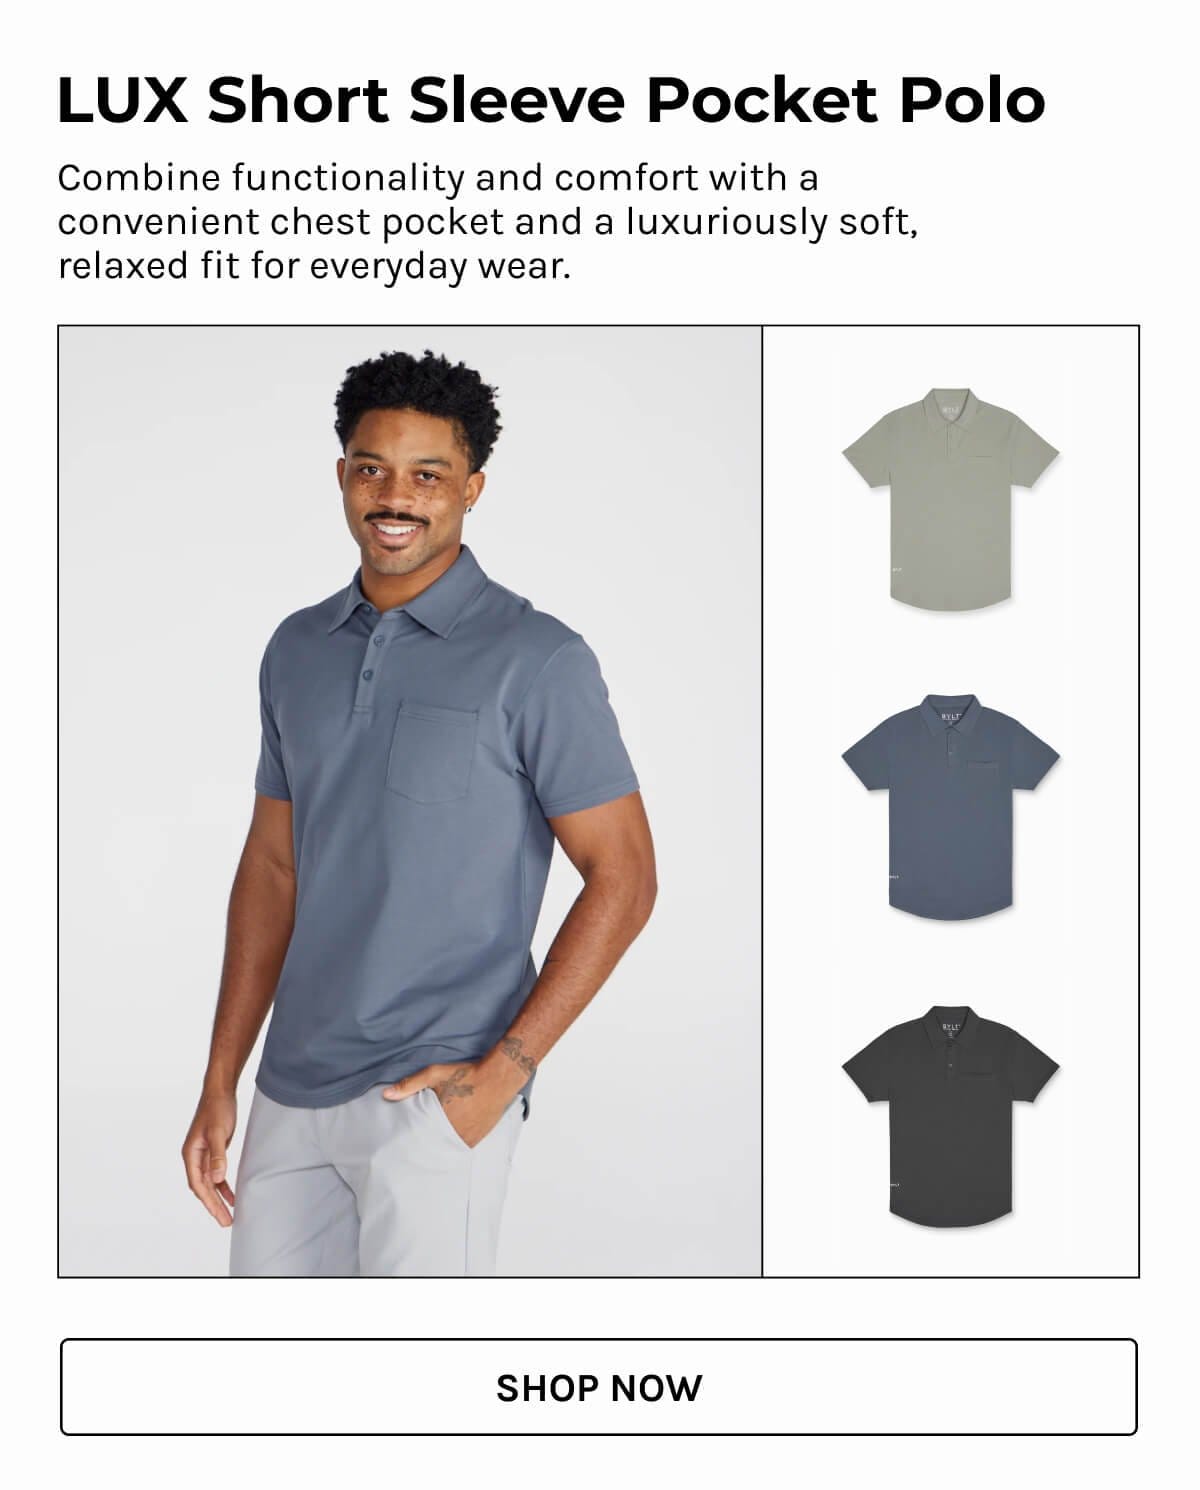 LUX Short Sleeve Pocket Polo: Combine functionality and comfort with a convenient chest pocket and a luxuriously soft